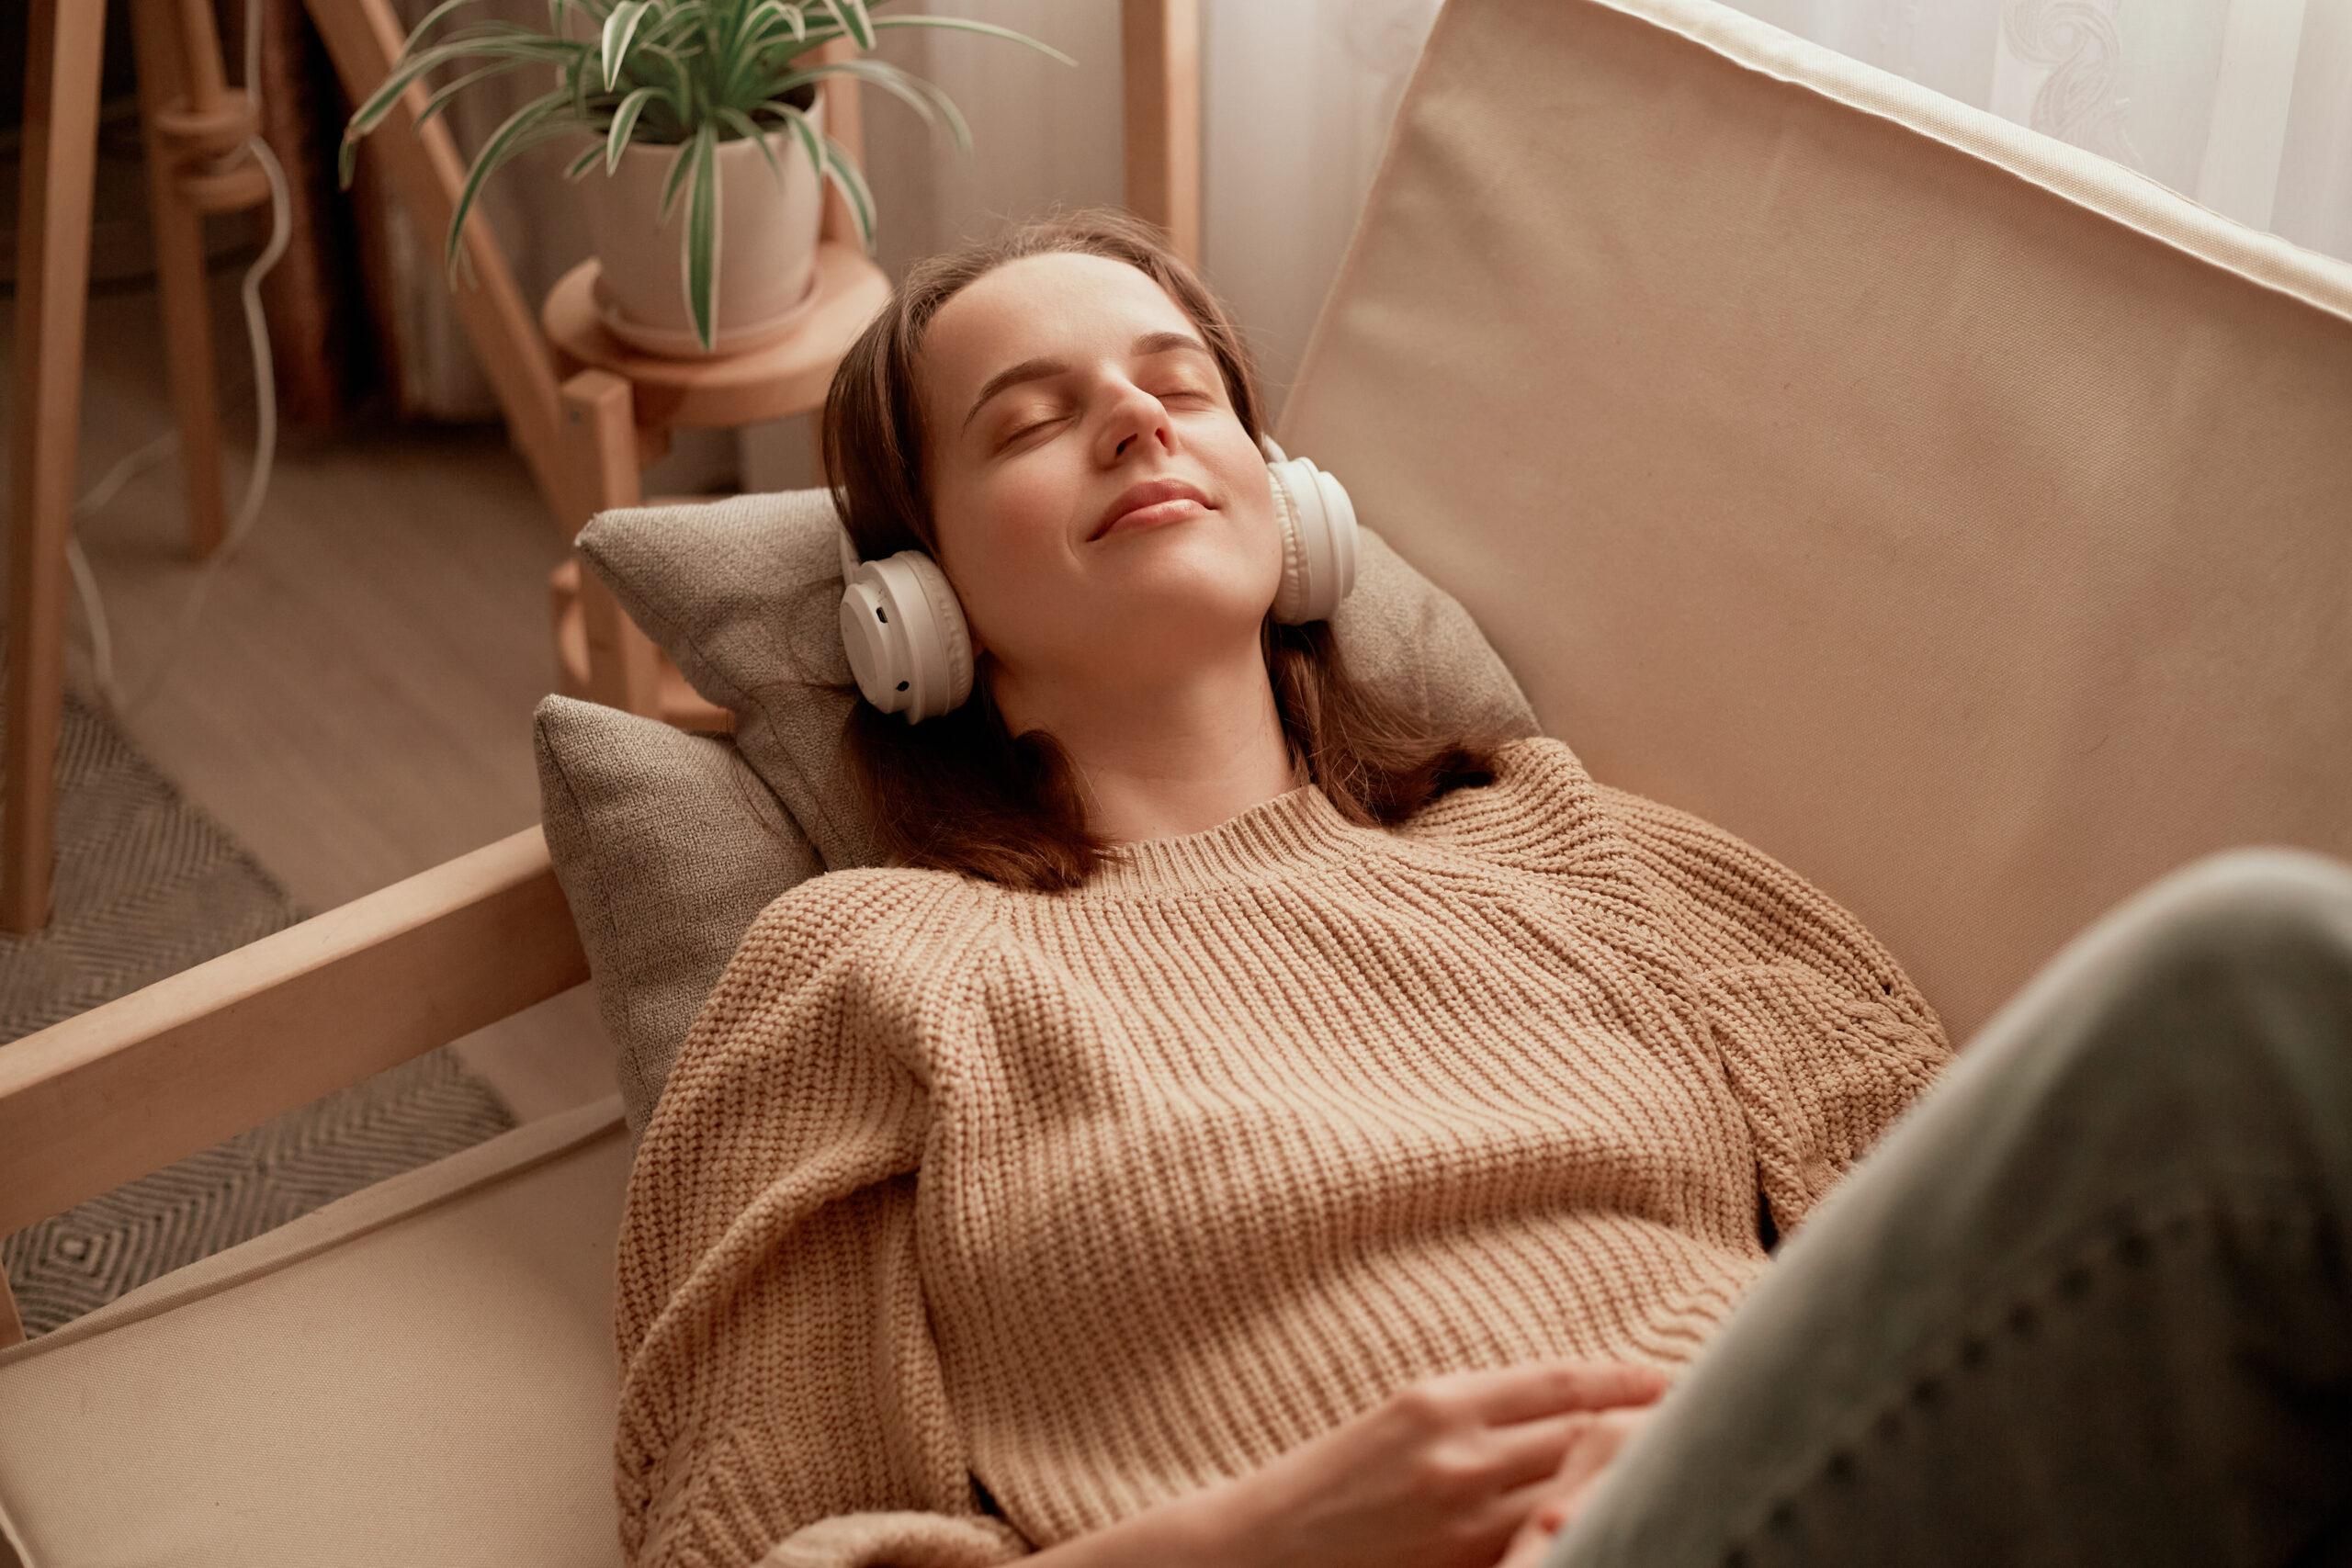 a woman laying on a couch listening to headphones.